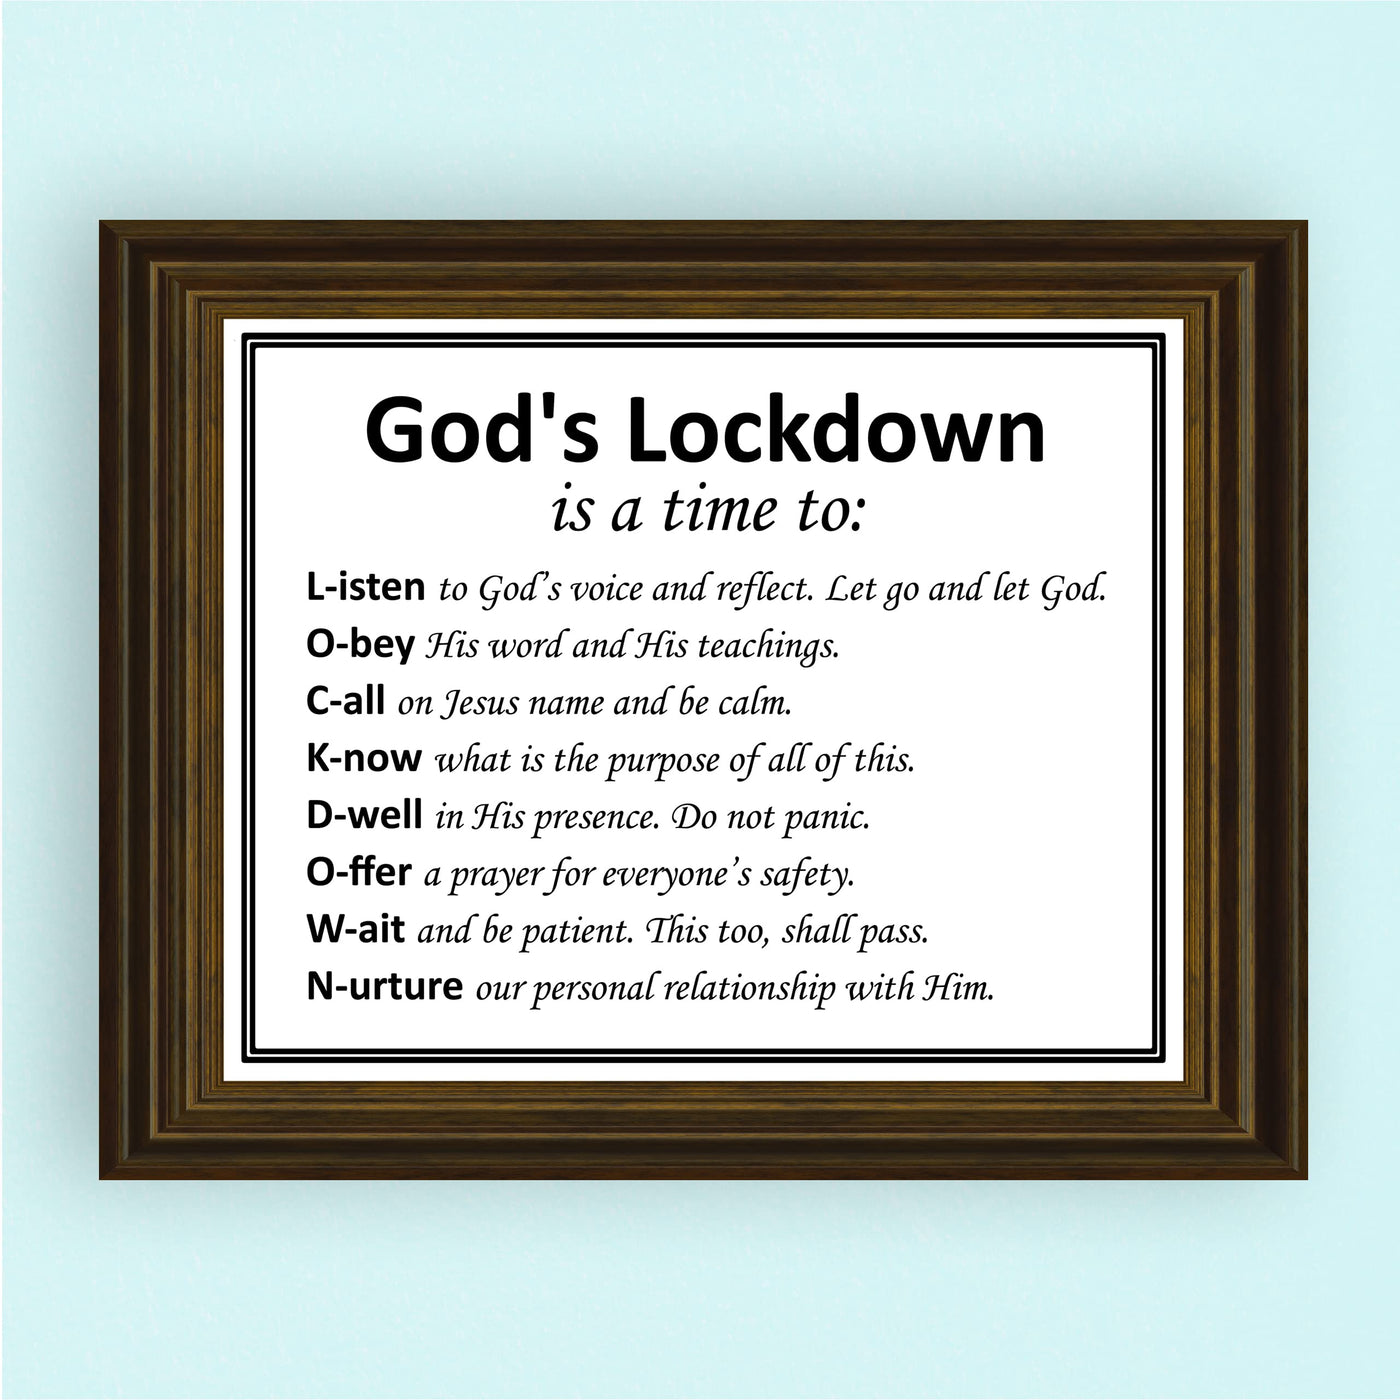 God's Lockdown- Time to Reflect- Inspirational Christian Wall Decor -10 x 8" Motivational Art Print -Ready to Frame. Home-Office-Church-Religious-Spiritual Decor. Great Gift & Reminders of Faith!